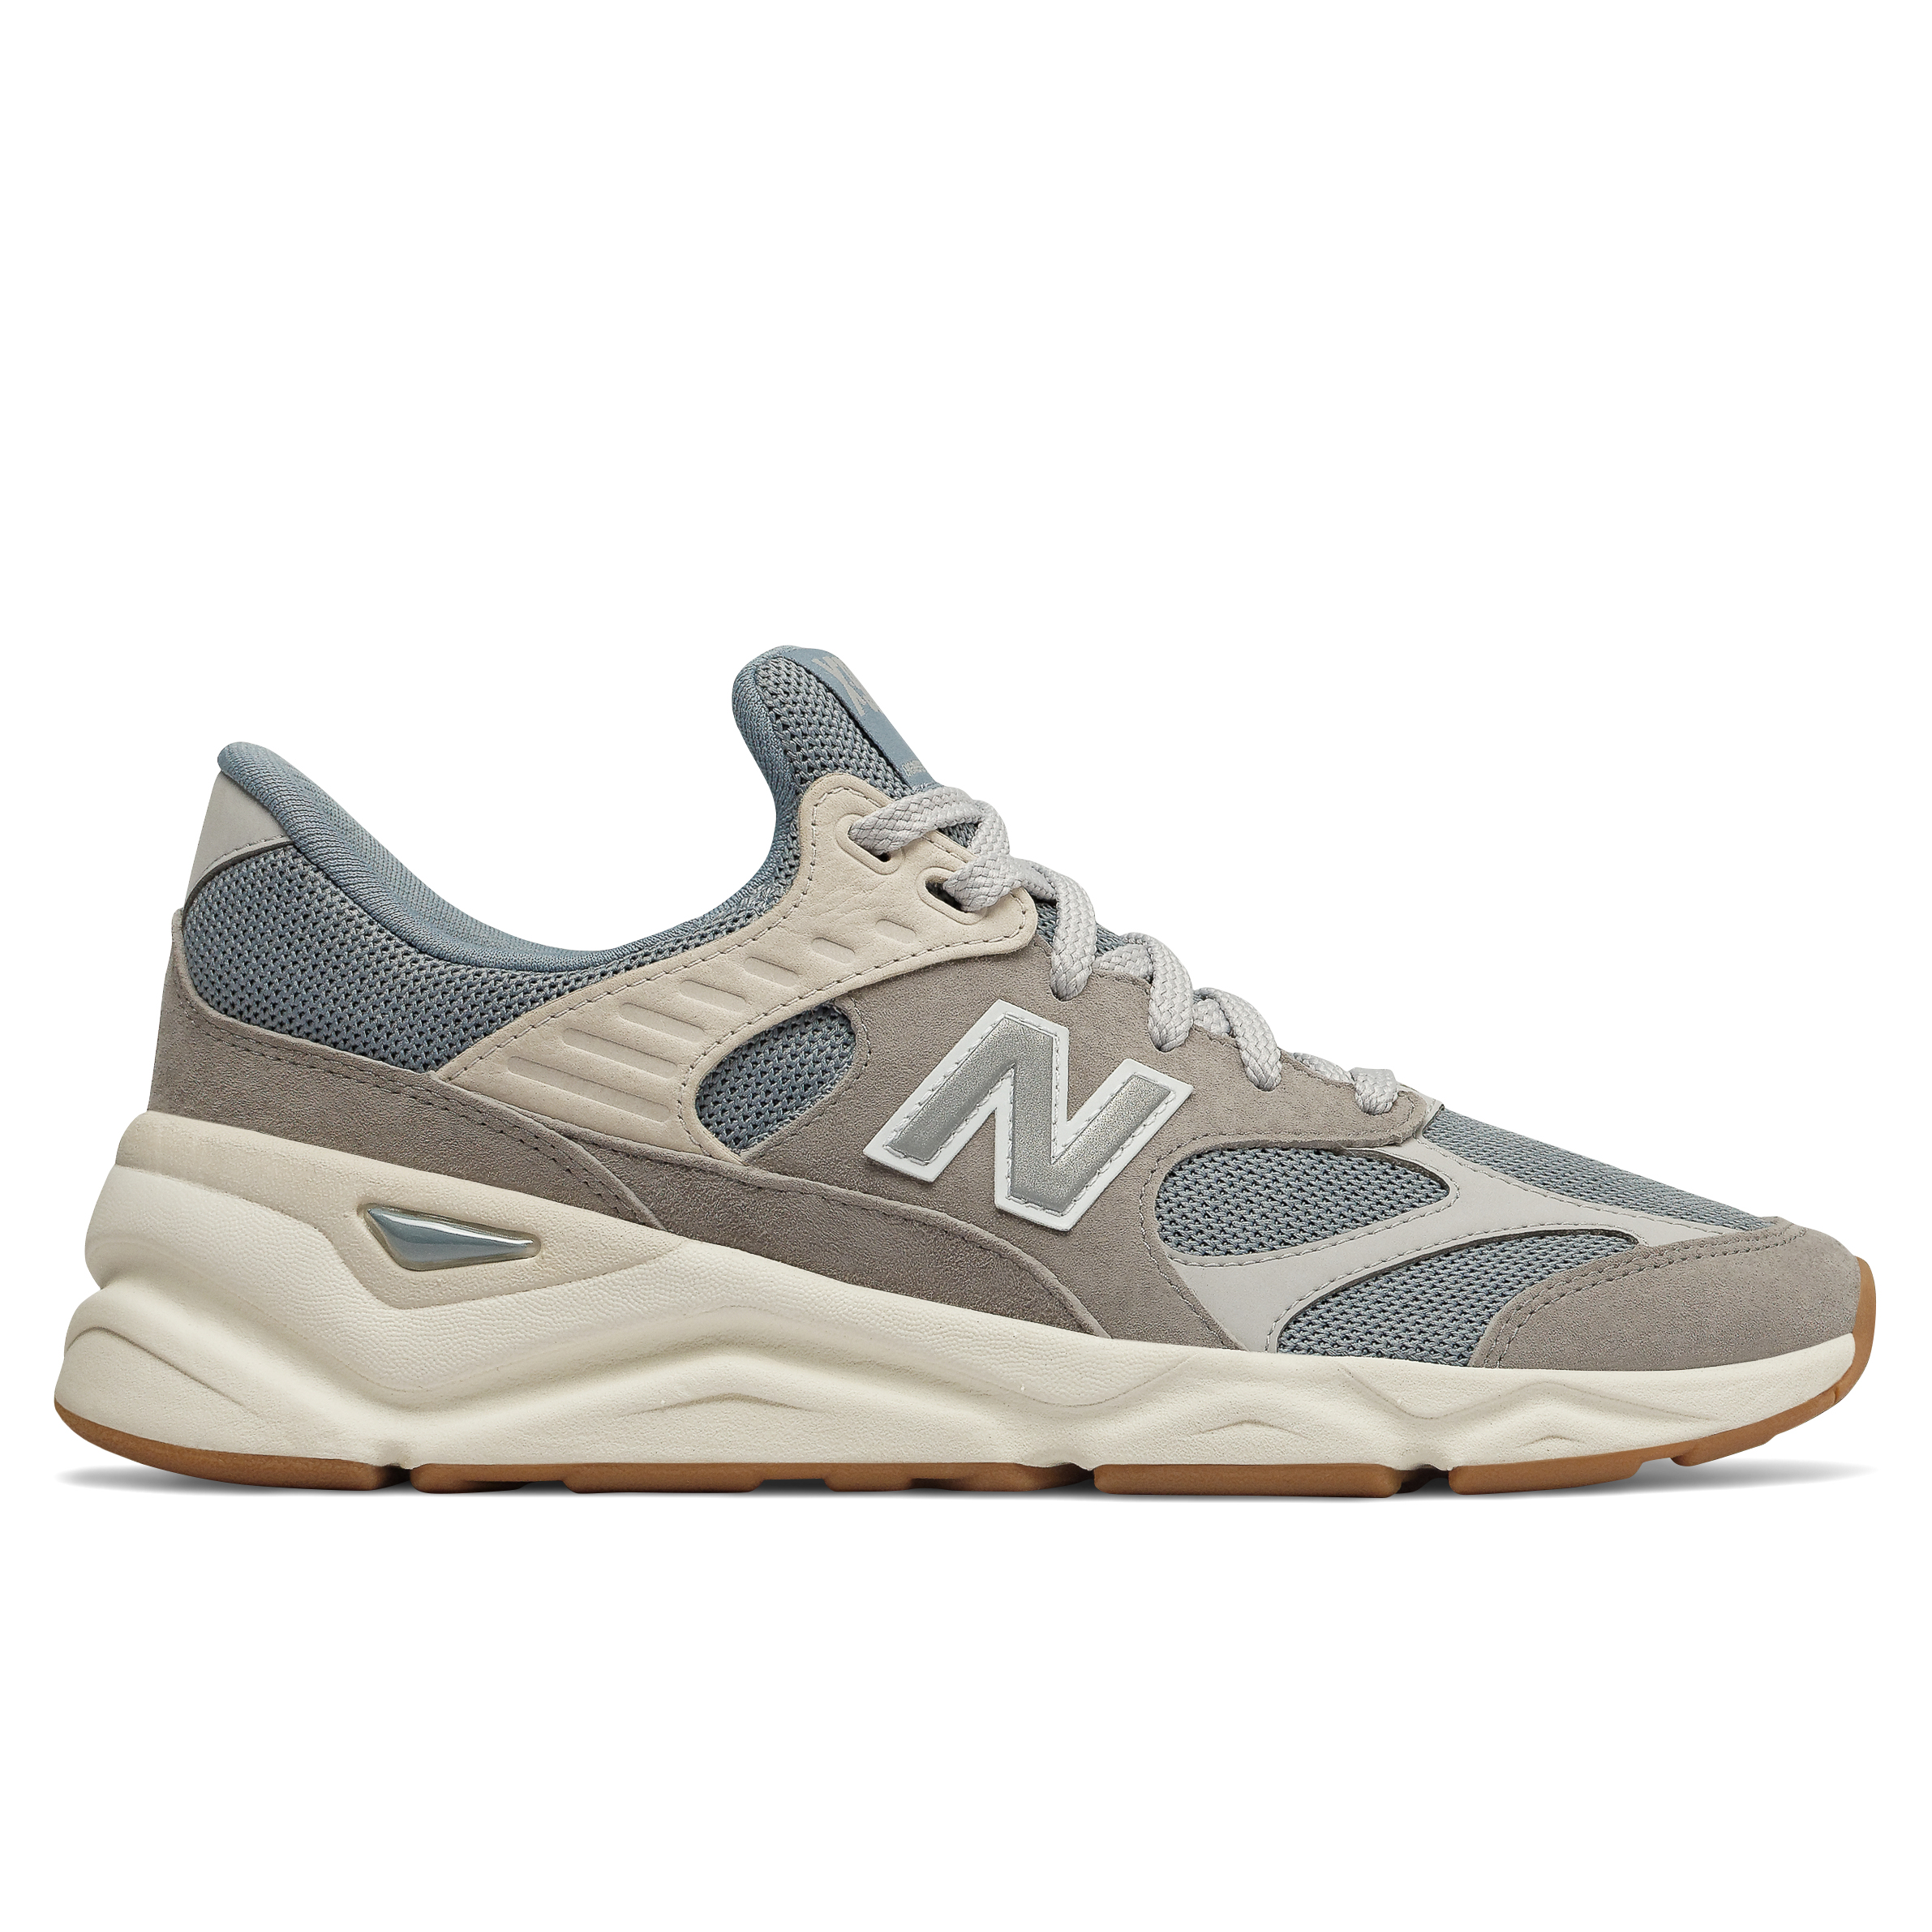 x90 reconstructed new balance